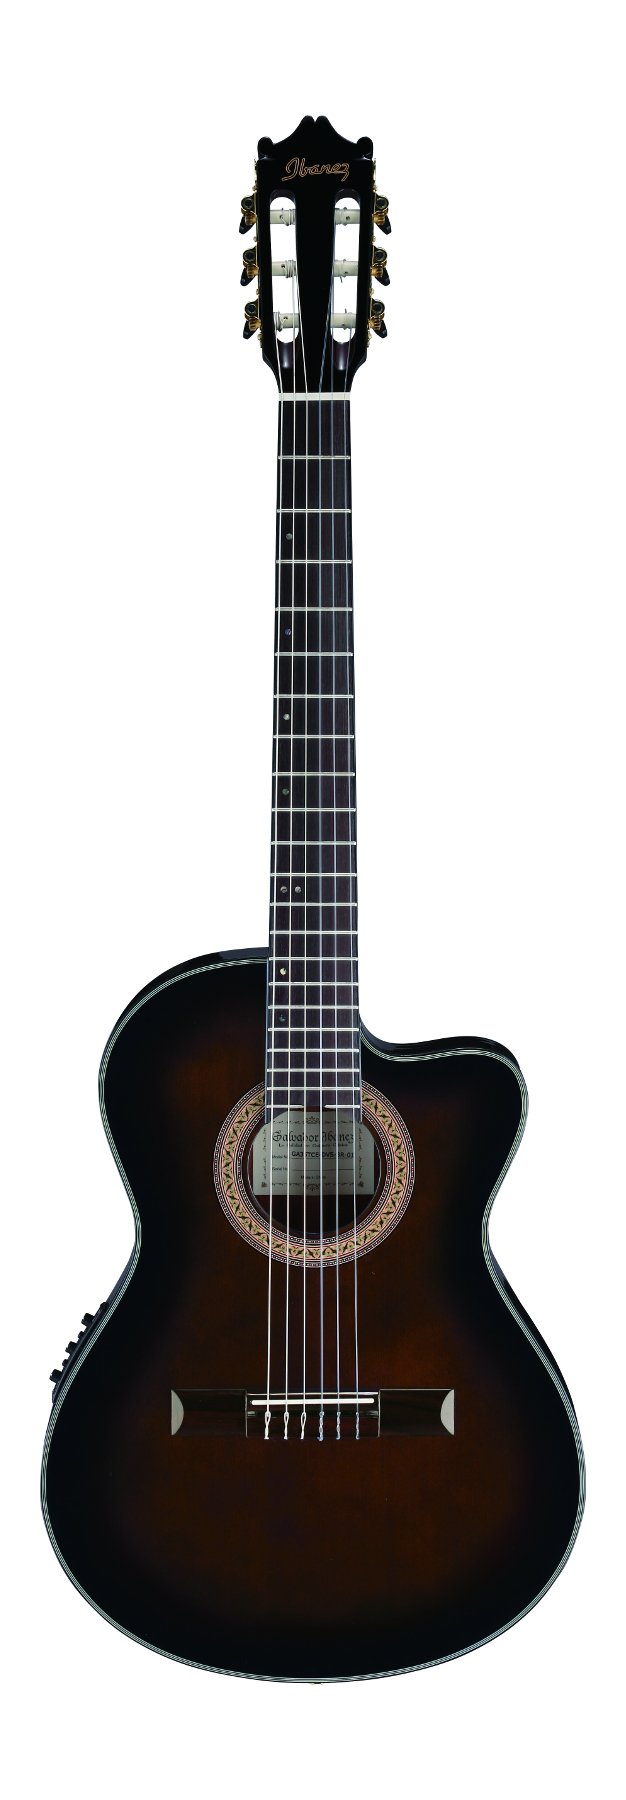 Ibanez GA35TCEDVS Thinline Cutaway Classical Acoustic-Electric Guitar for sale